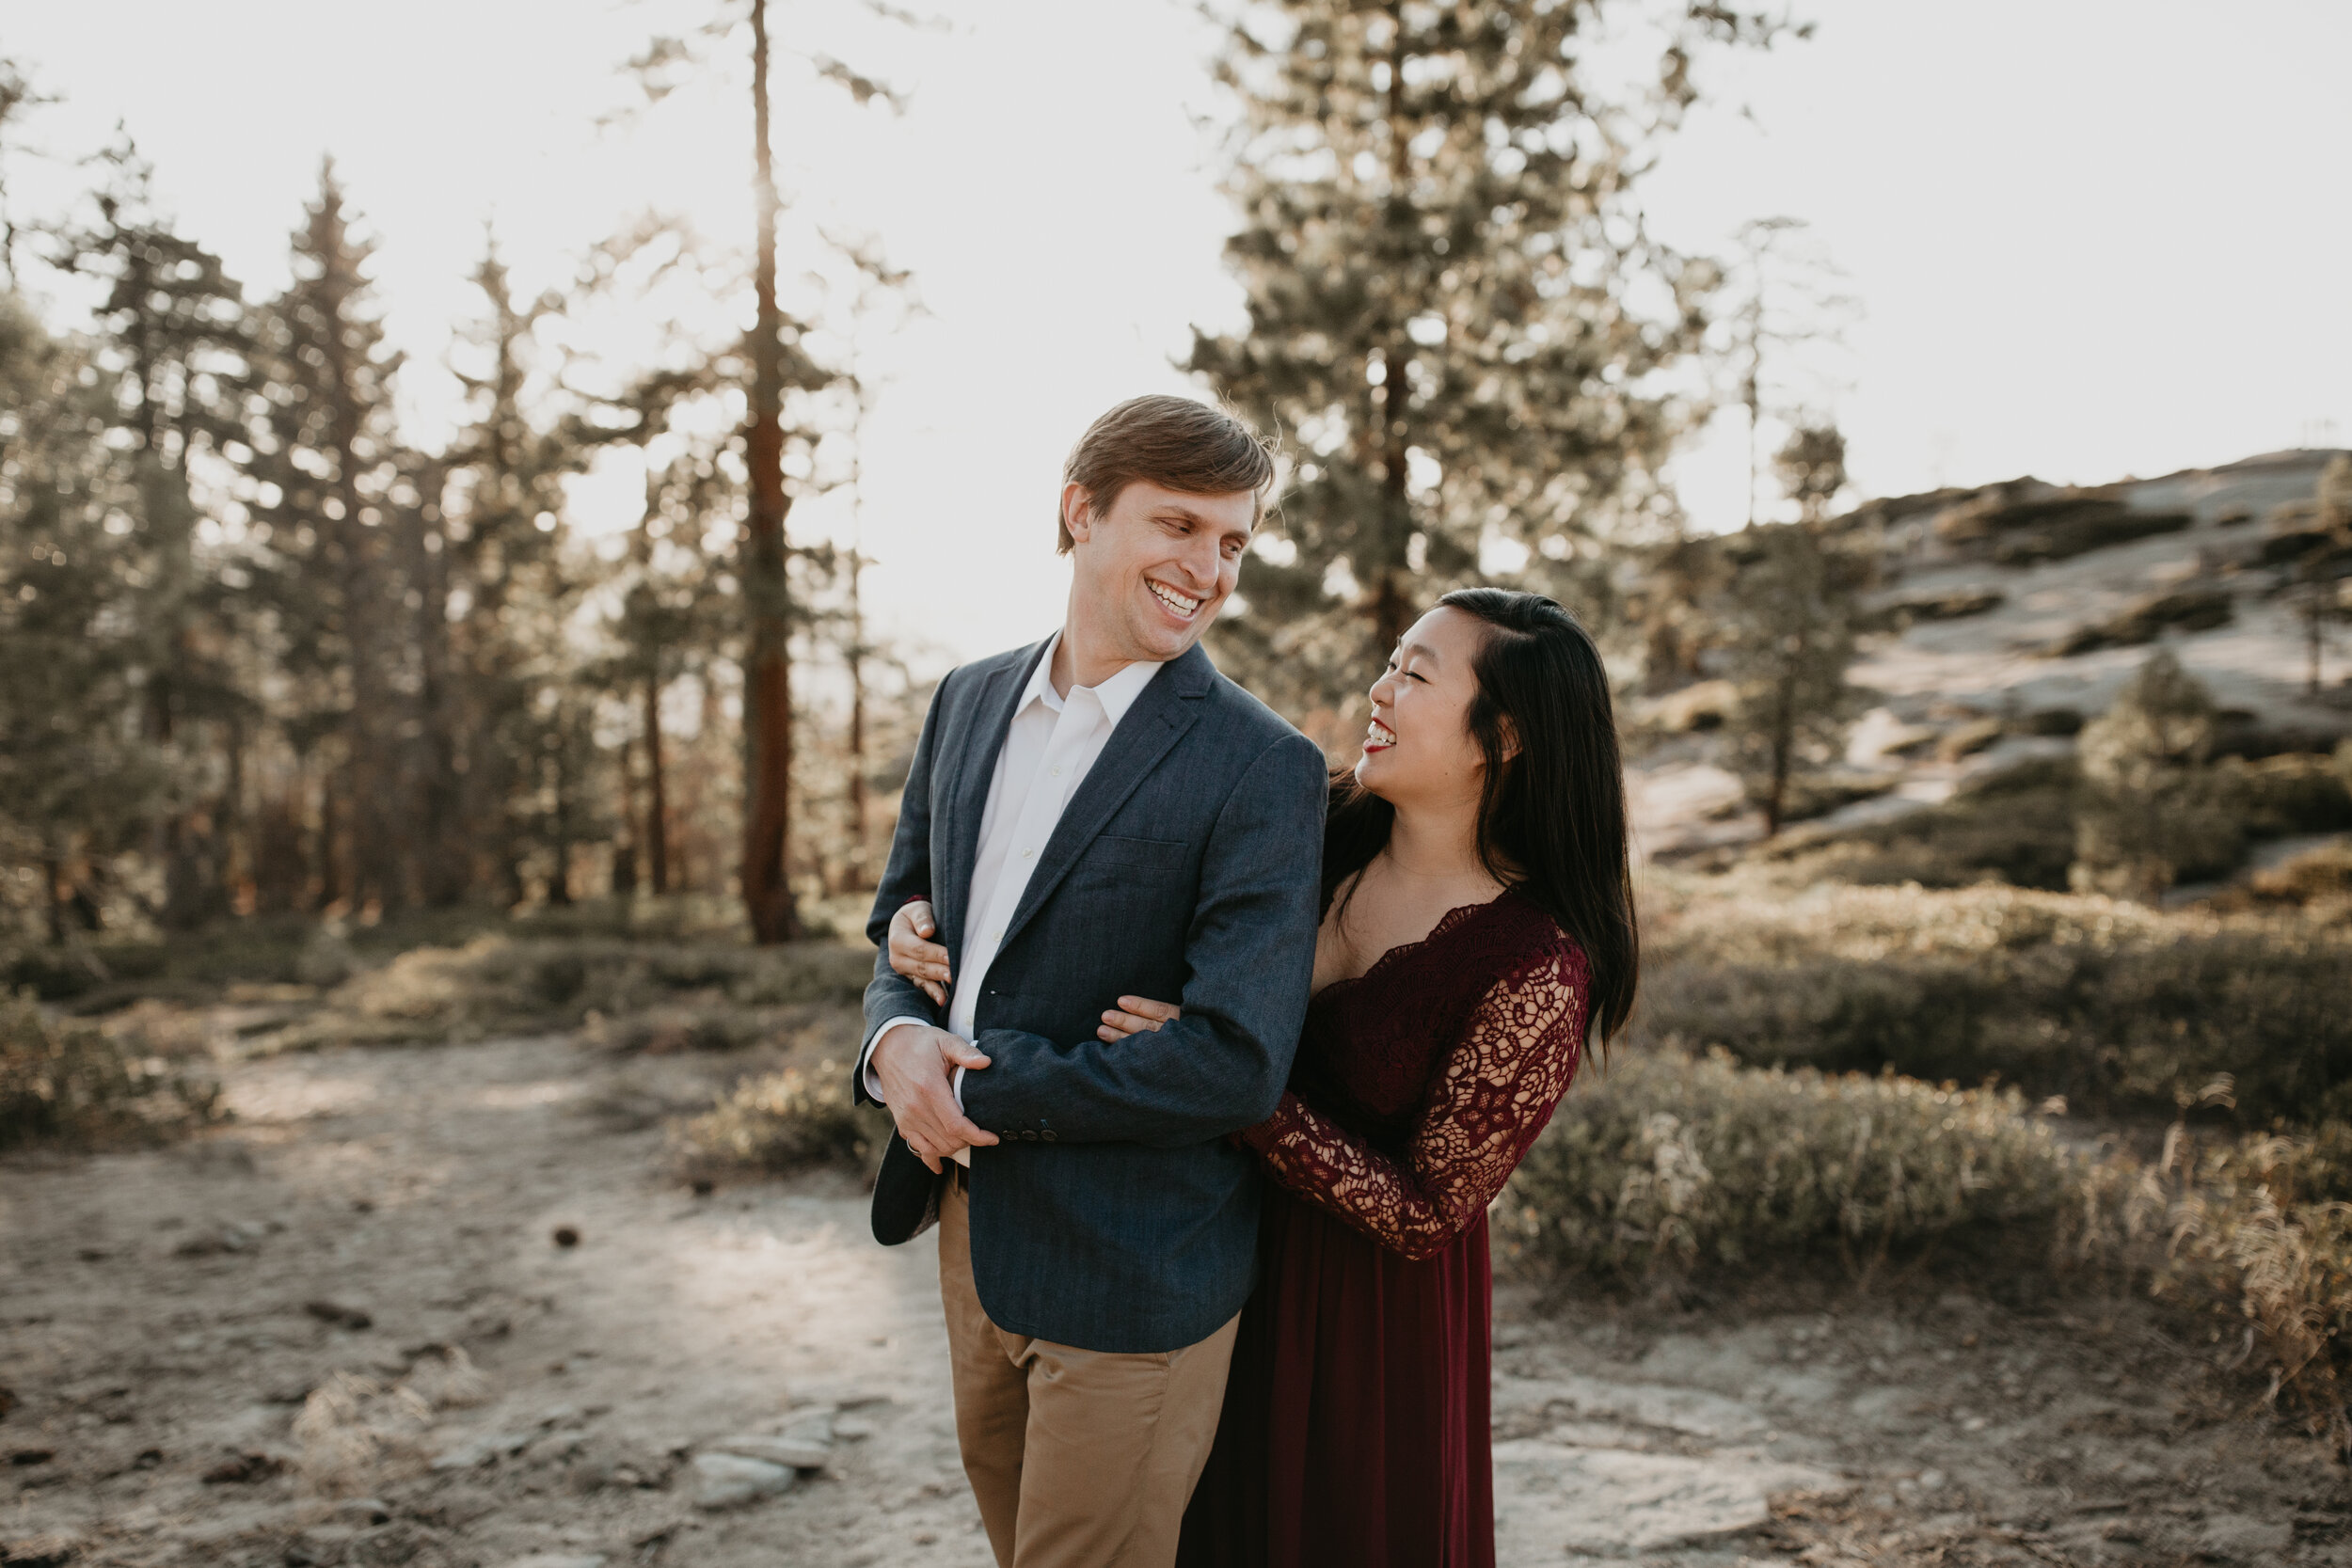 yosemite-national-park-couples-session-at-taft-point-and-yosemite-valley-yosemite-elopement-photographer-nicole-daacke-photography-118.jpg